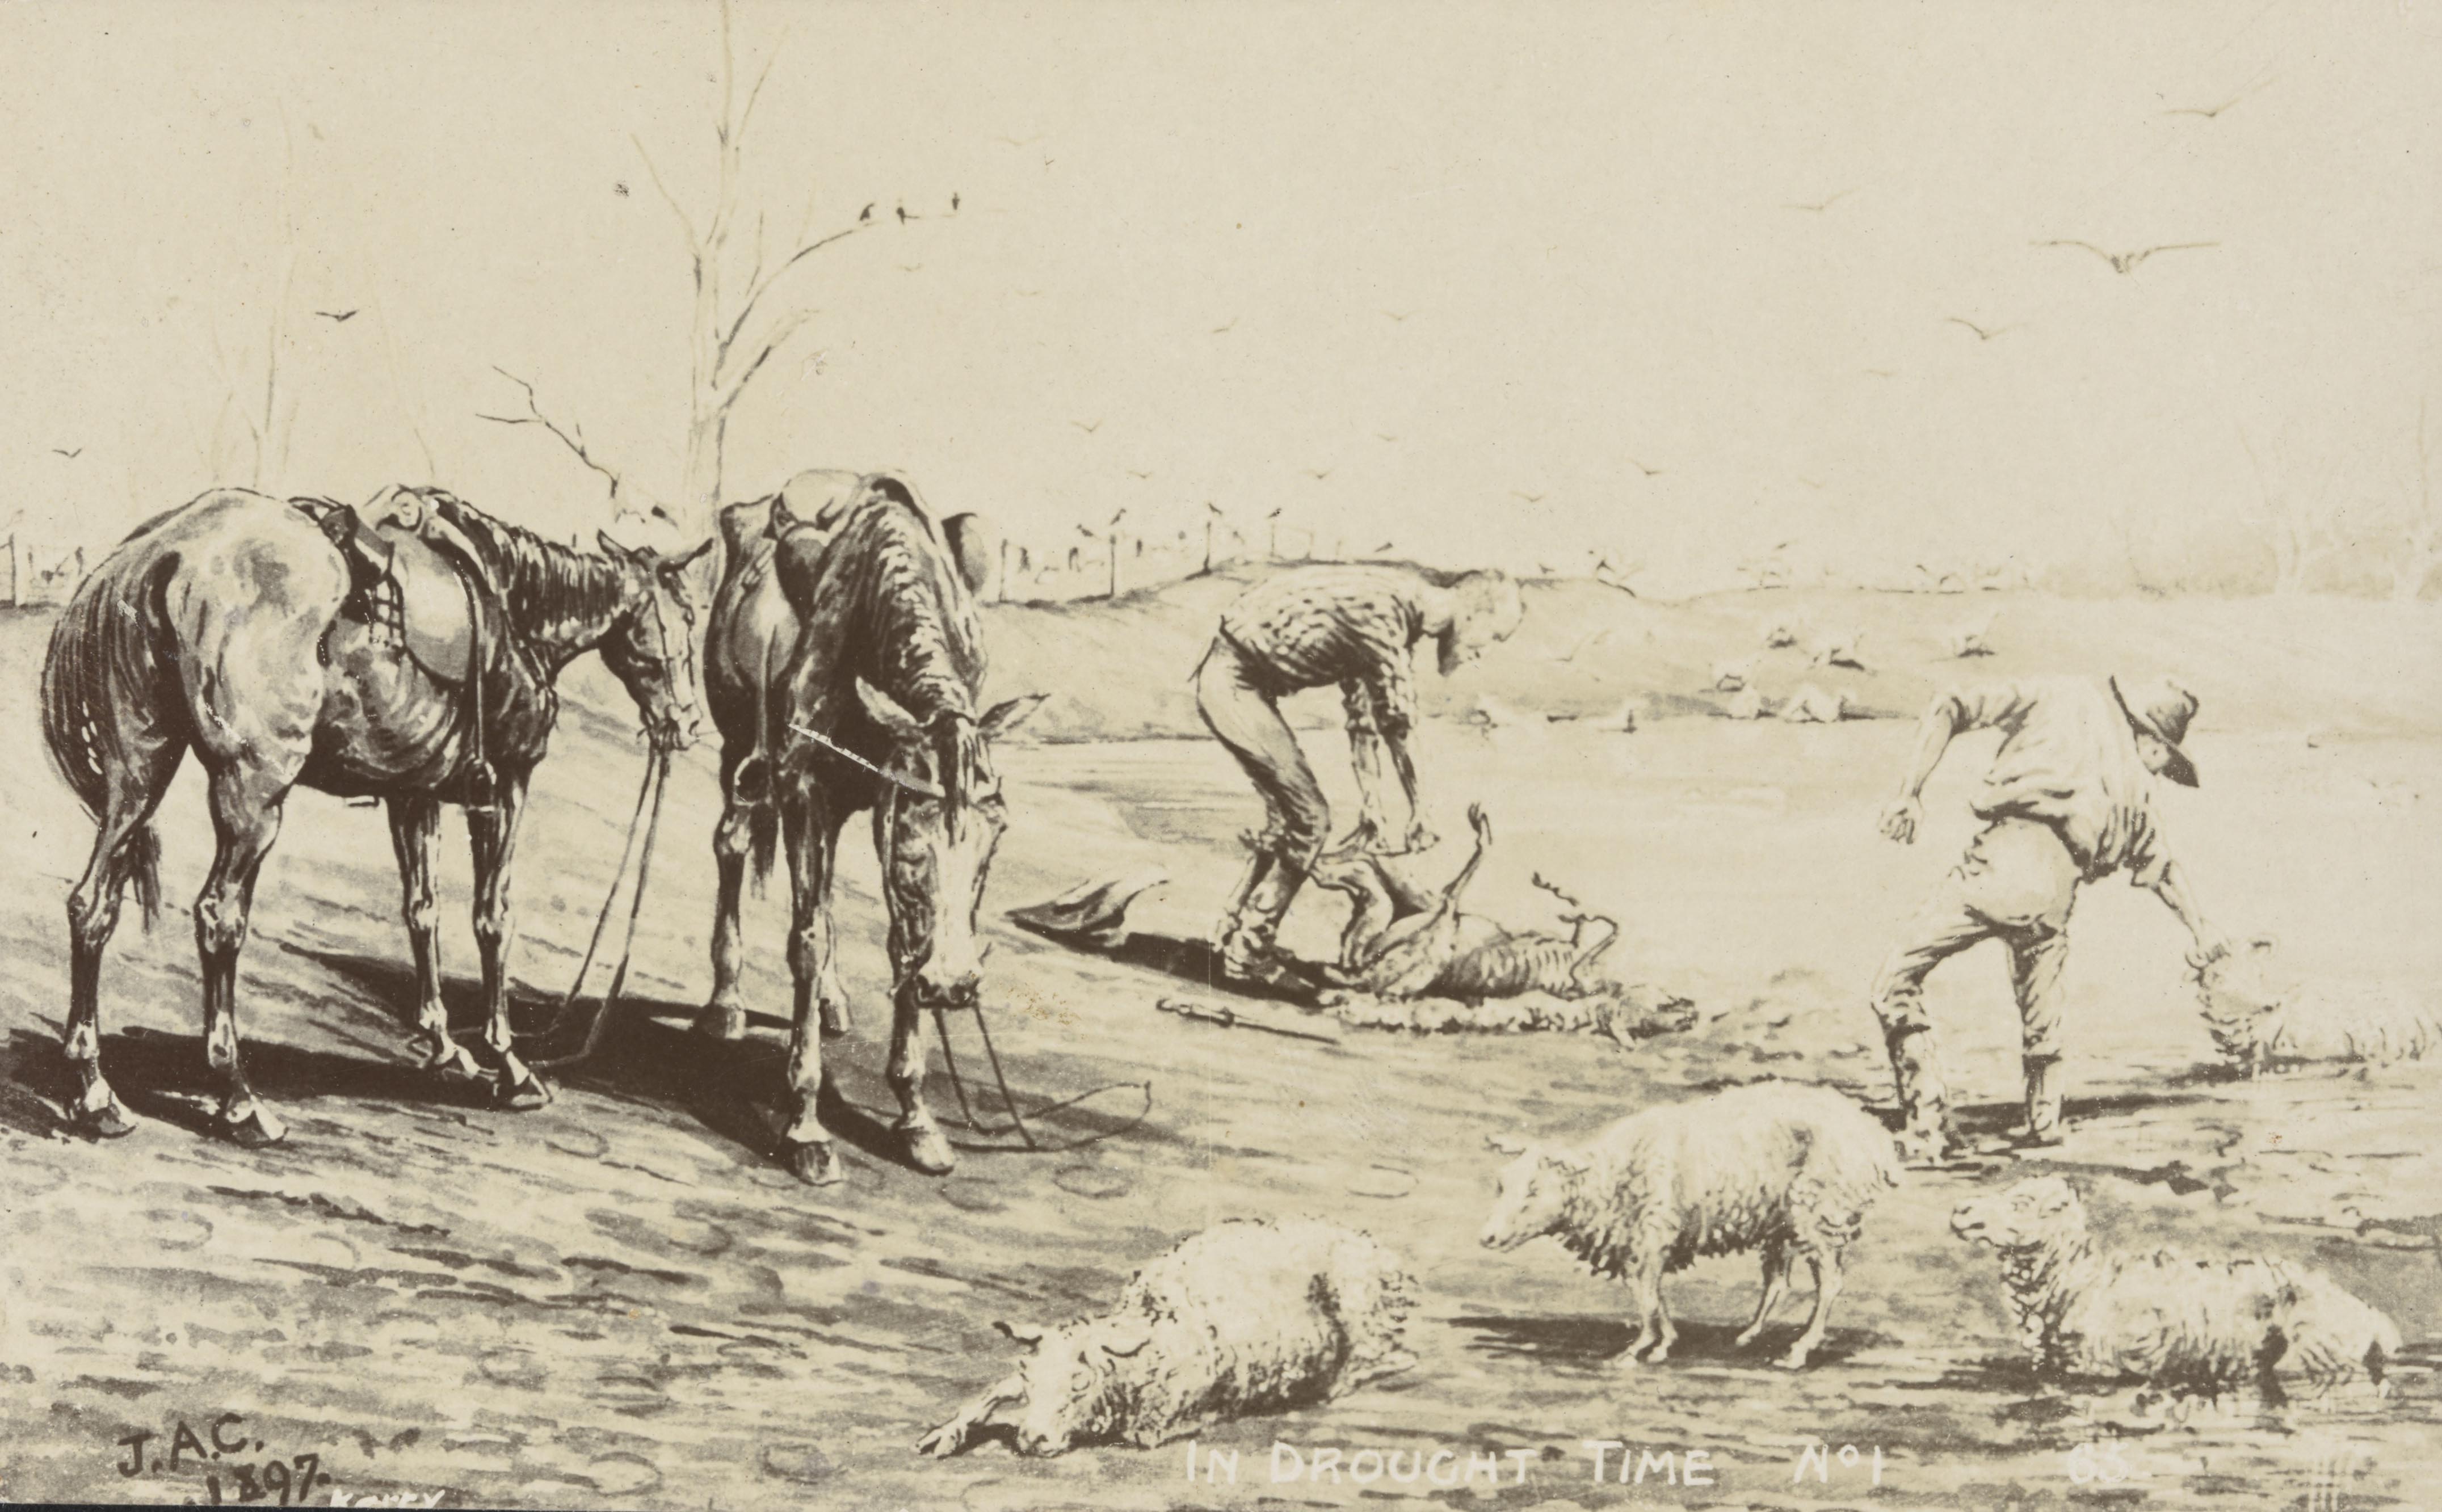 ‘In drought time’, 1897, by John Anthony Commins.